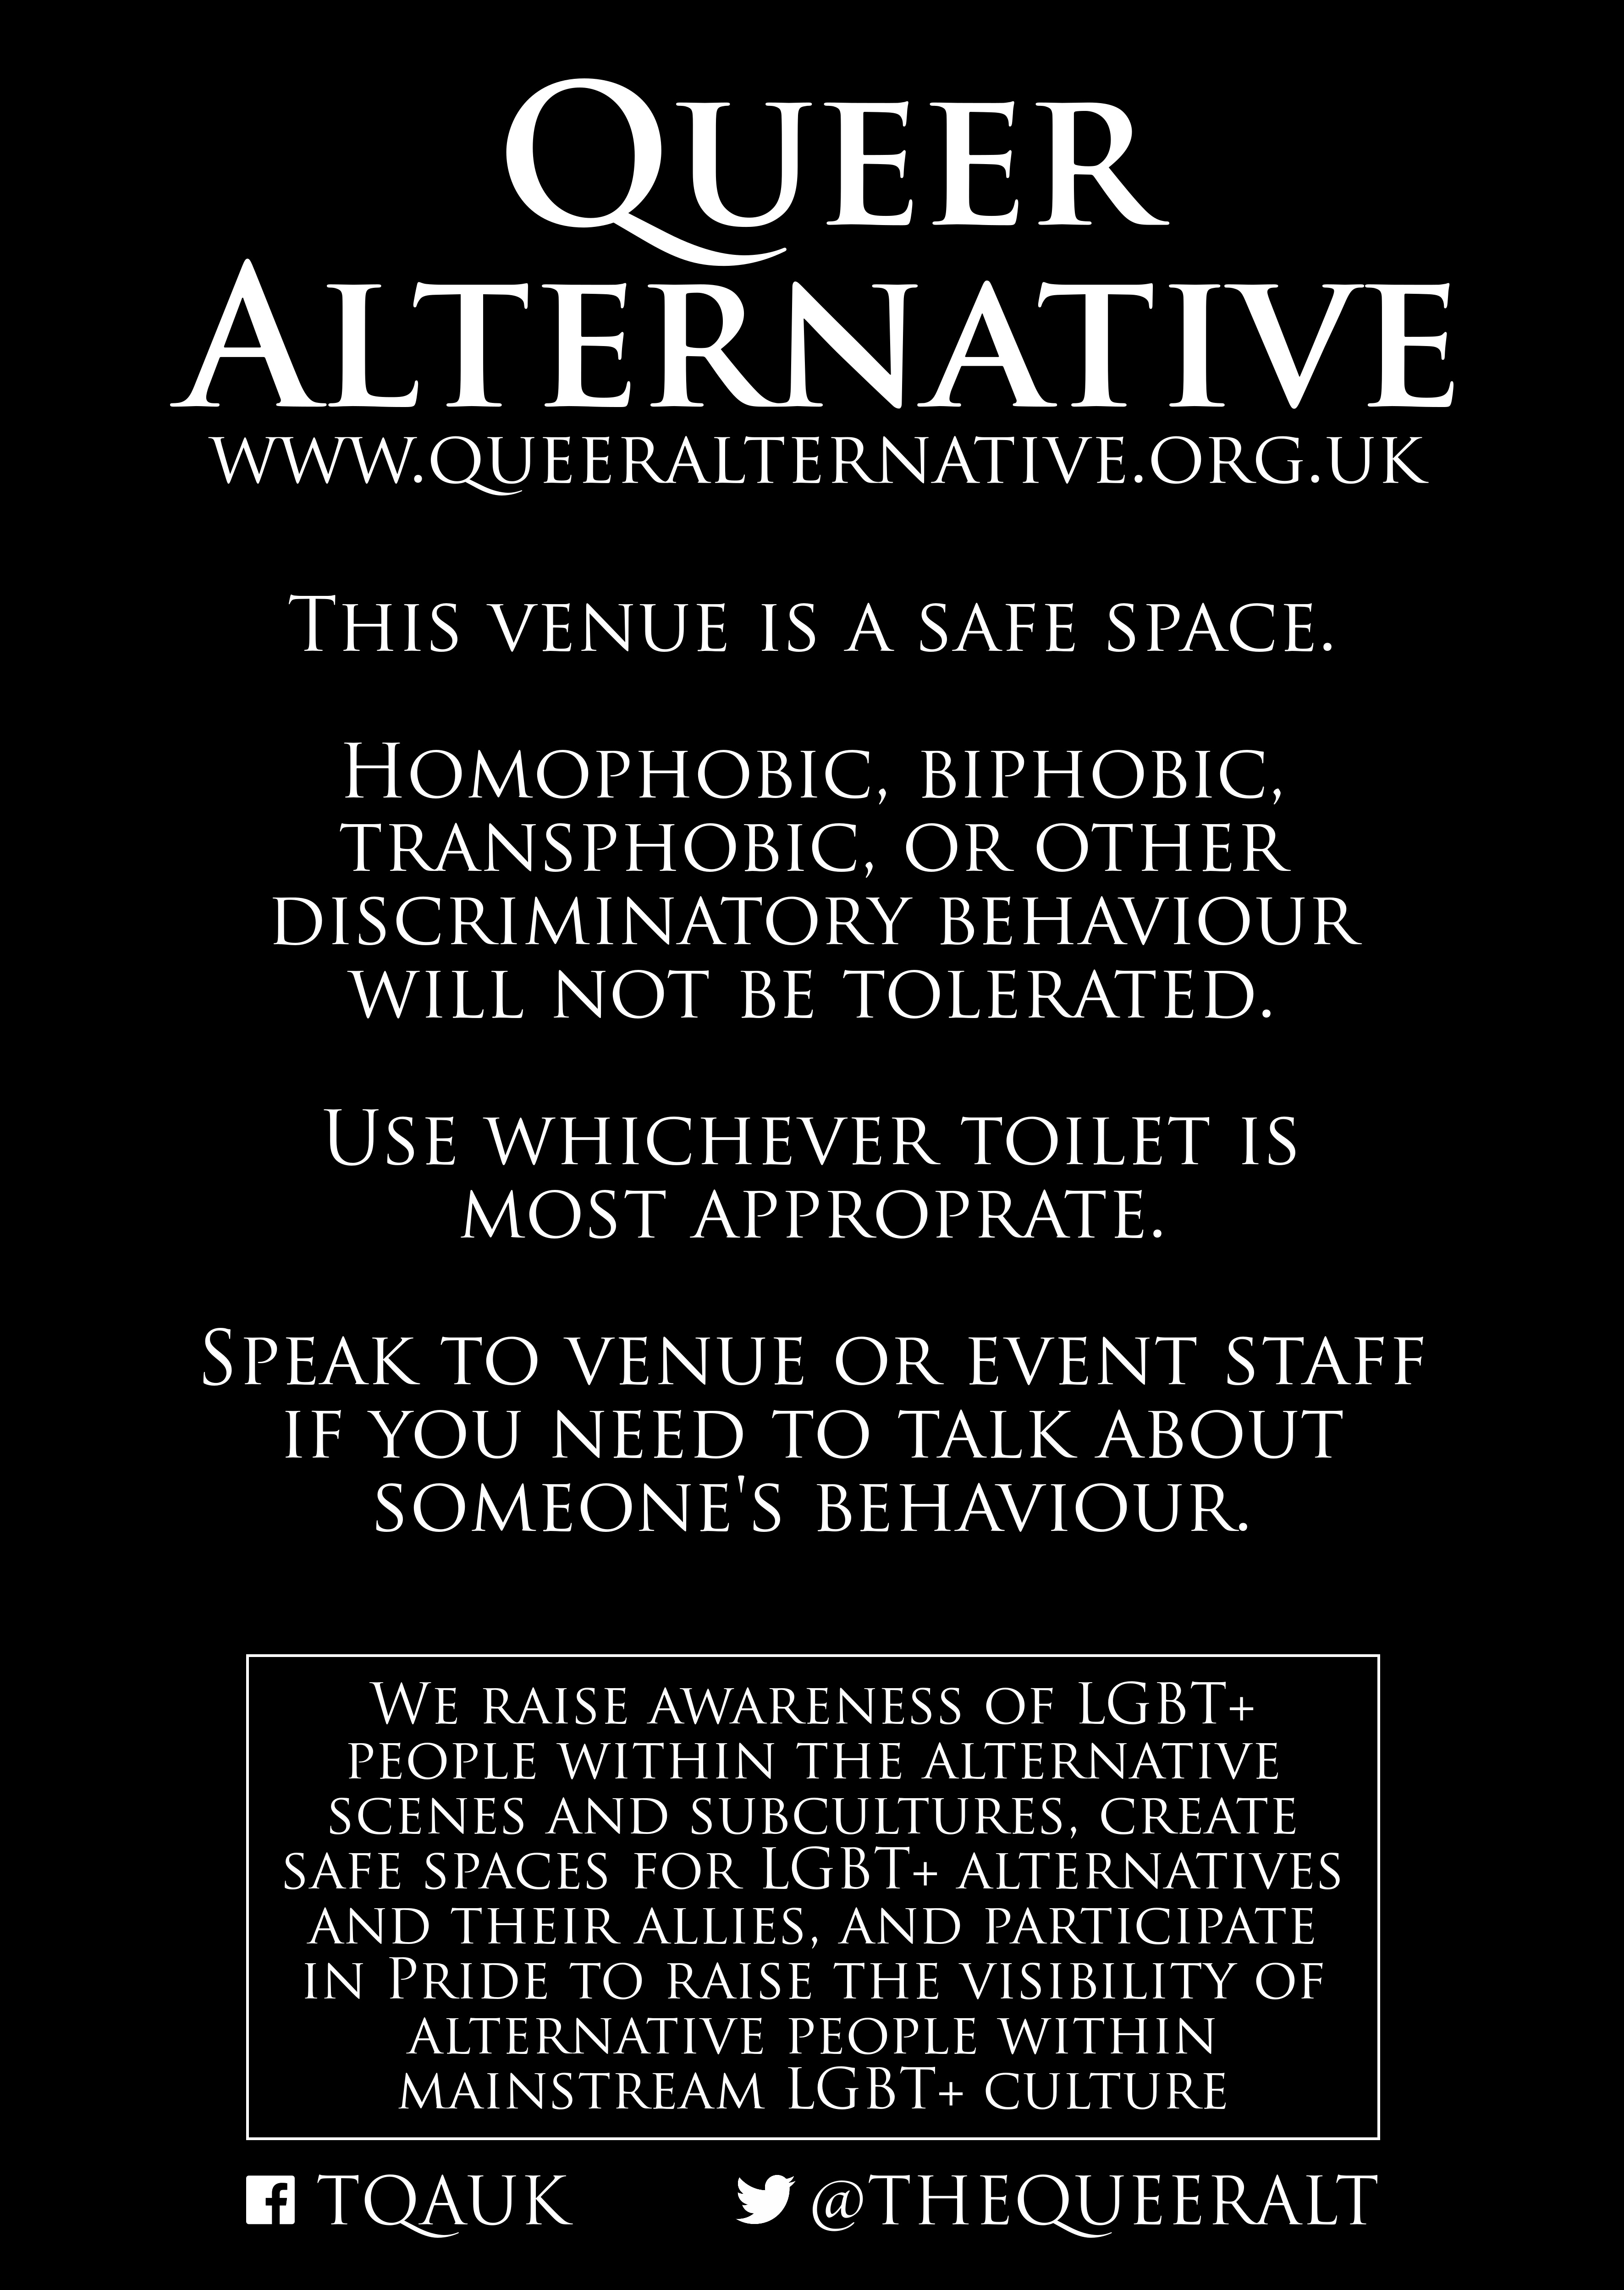 Safe Space poster